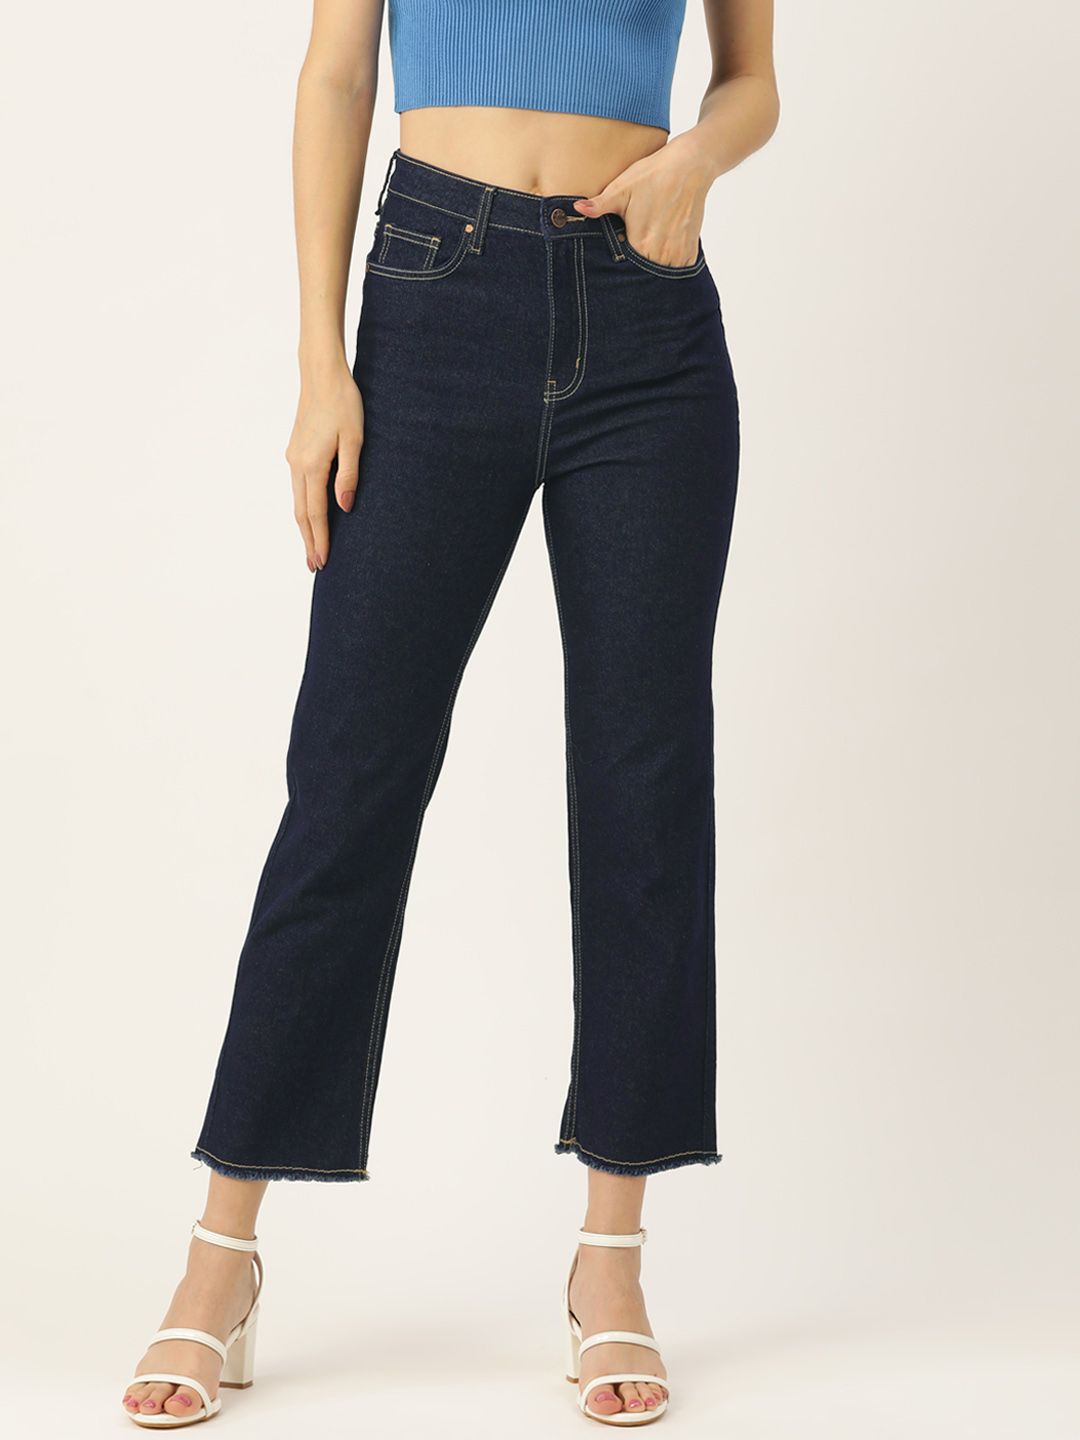 AND Women Navy Blue Stretchable Cropped Jeans Price in India